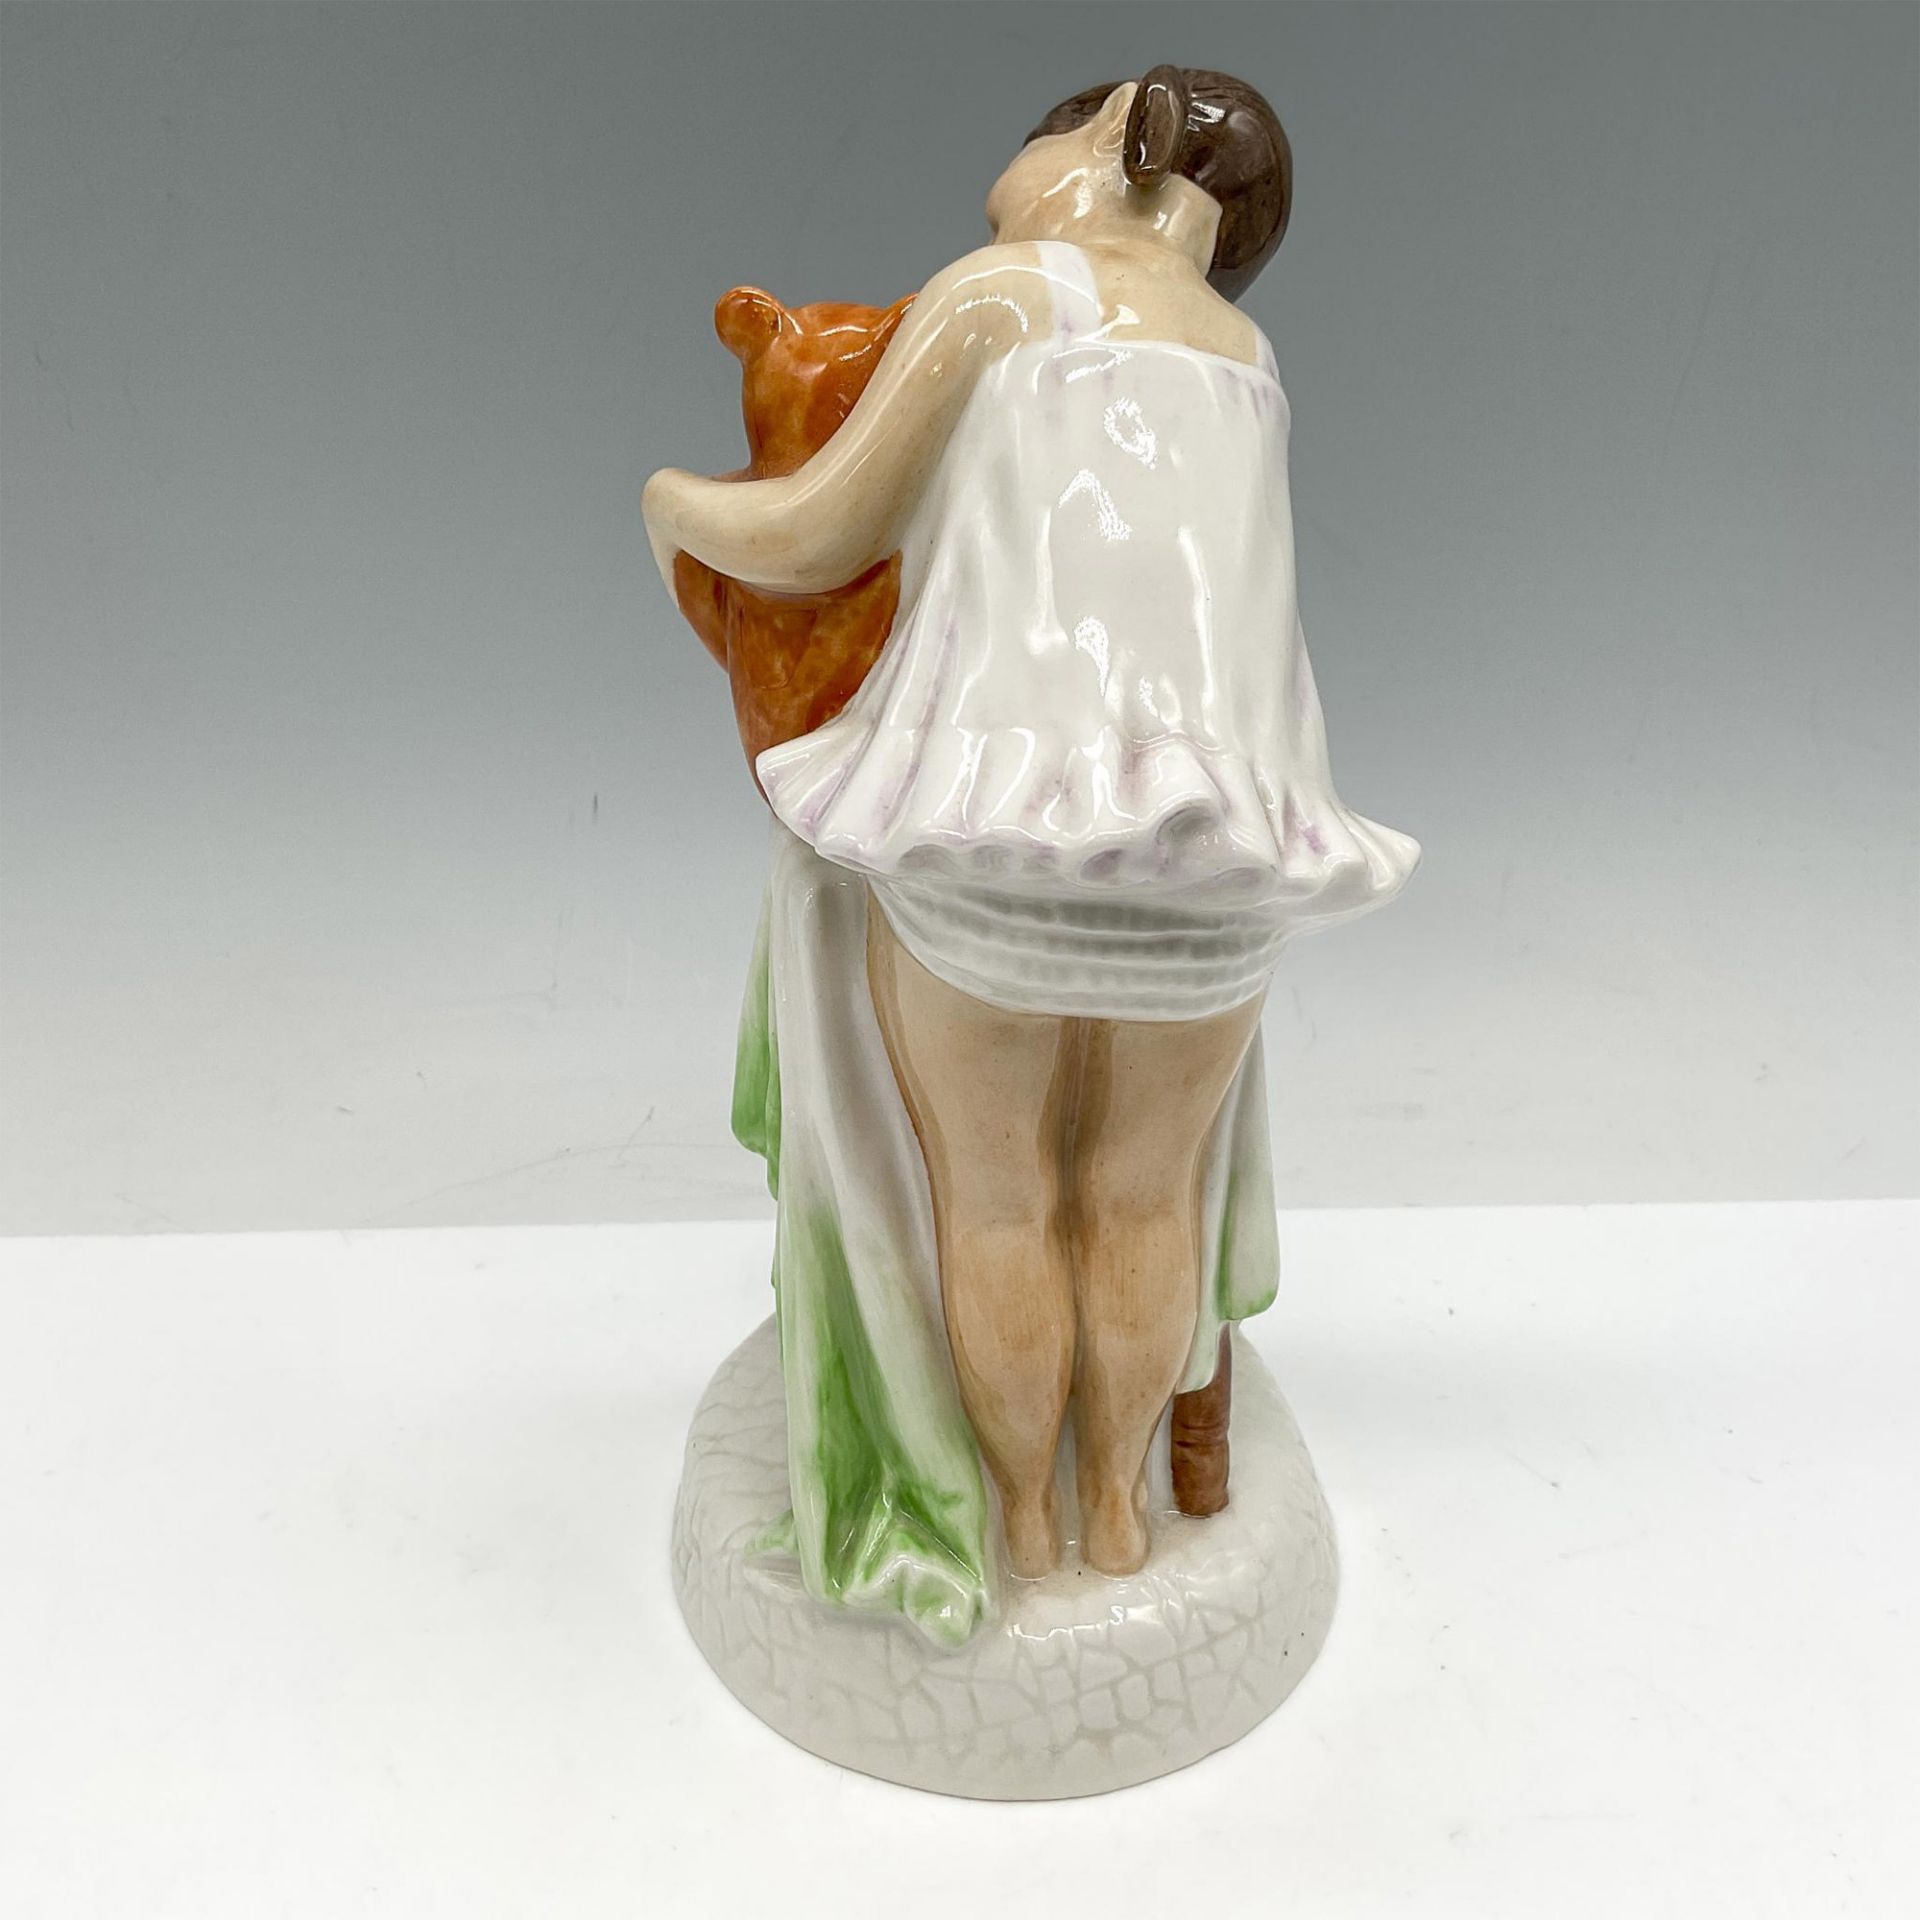 And One for You - HN2970 - Royal Doulton Figurine - Image 2 of 3